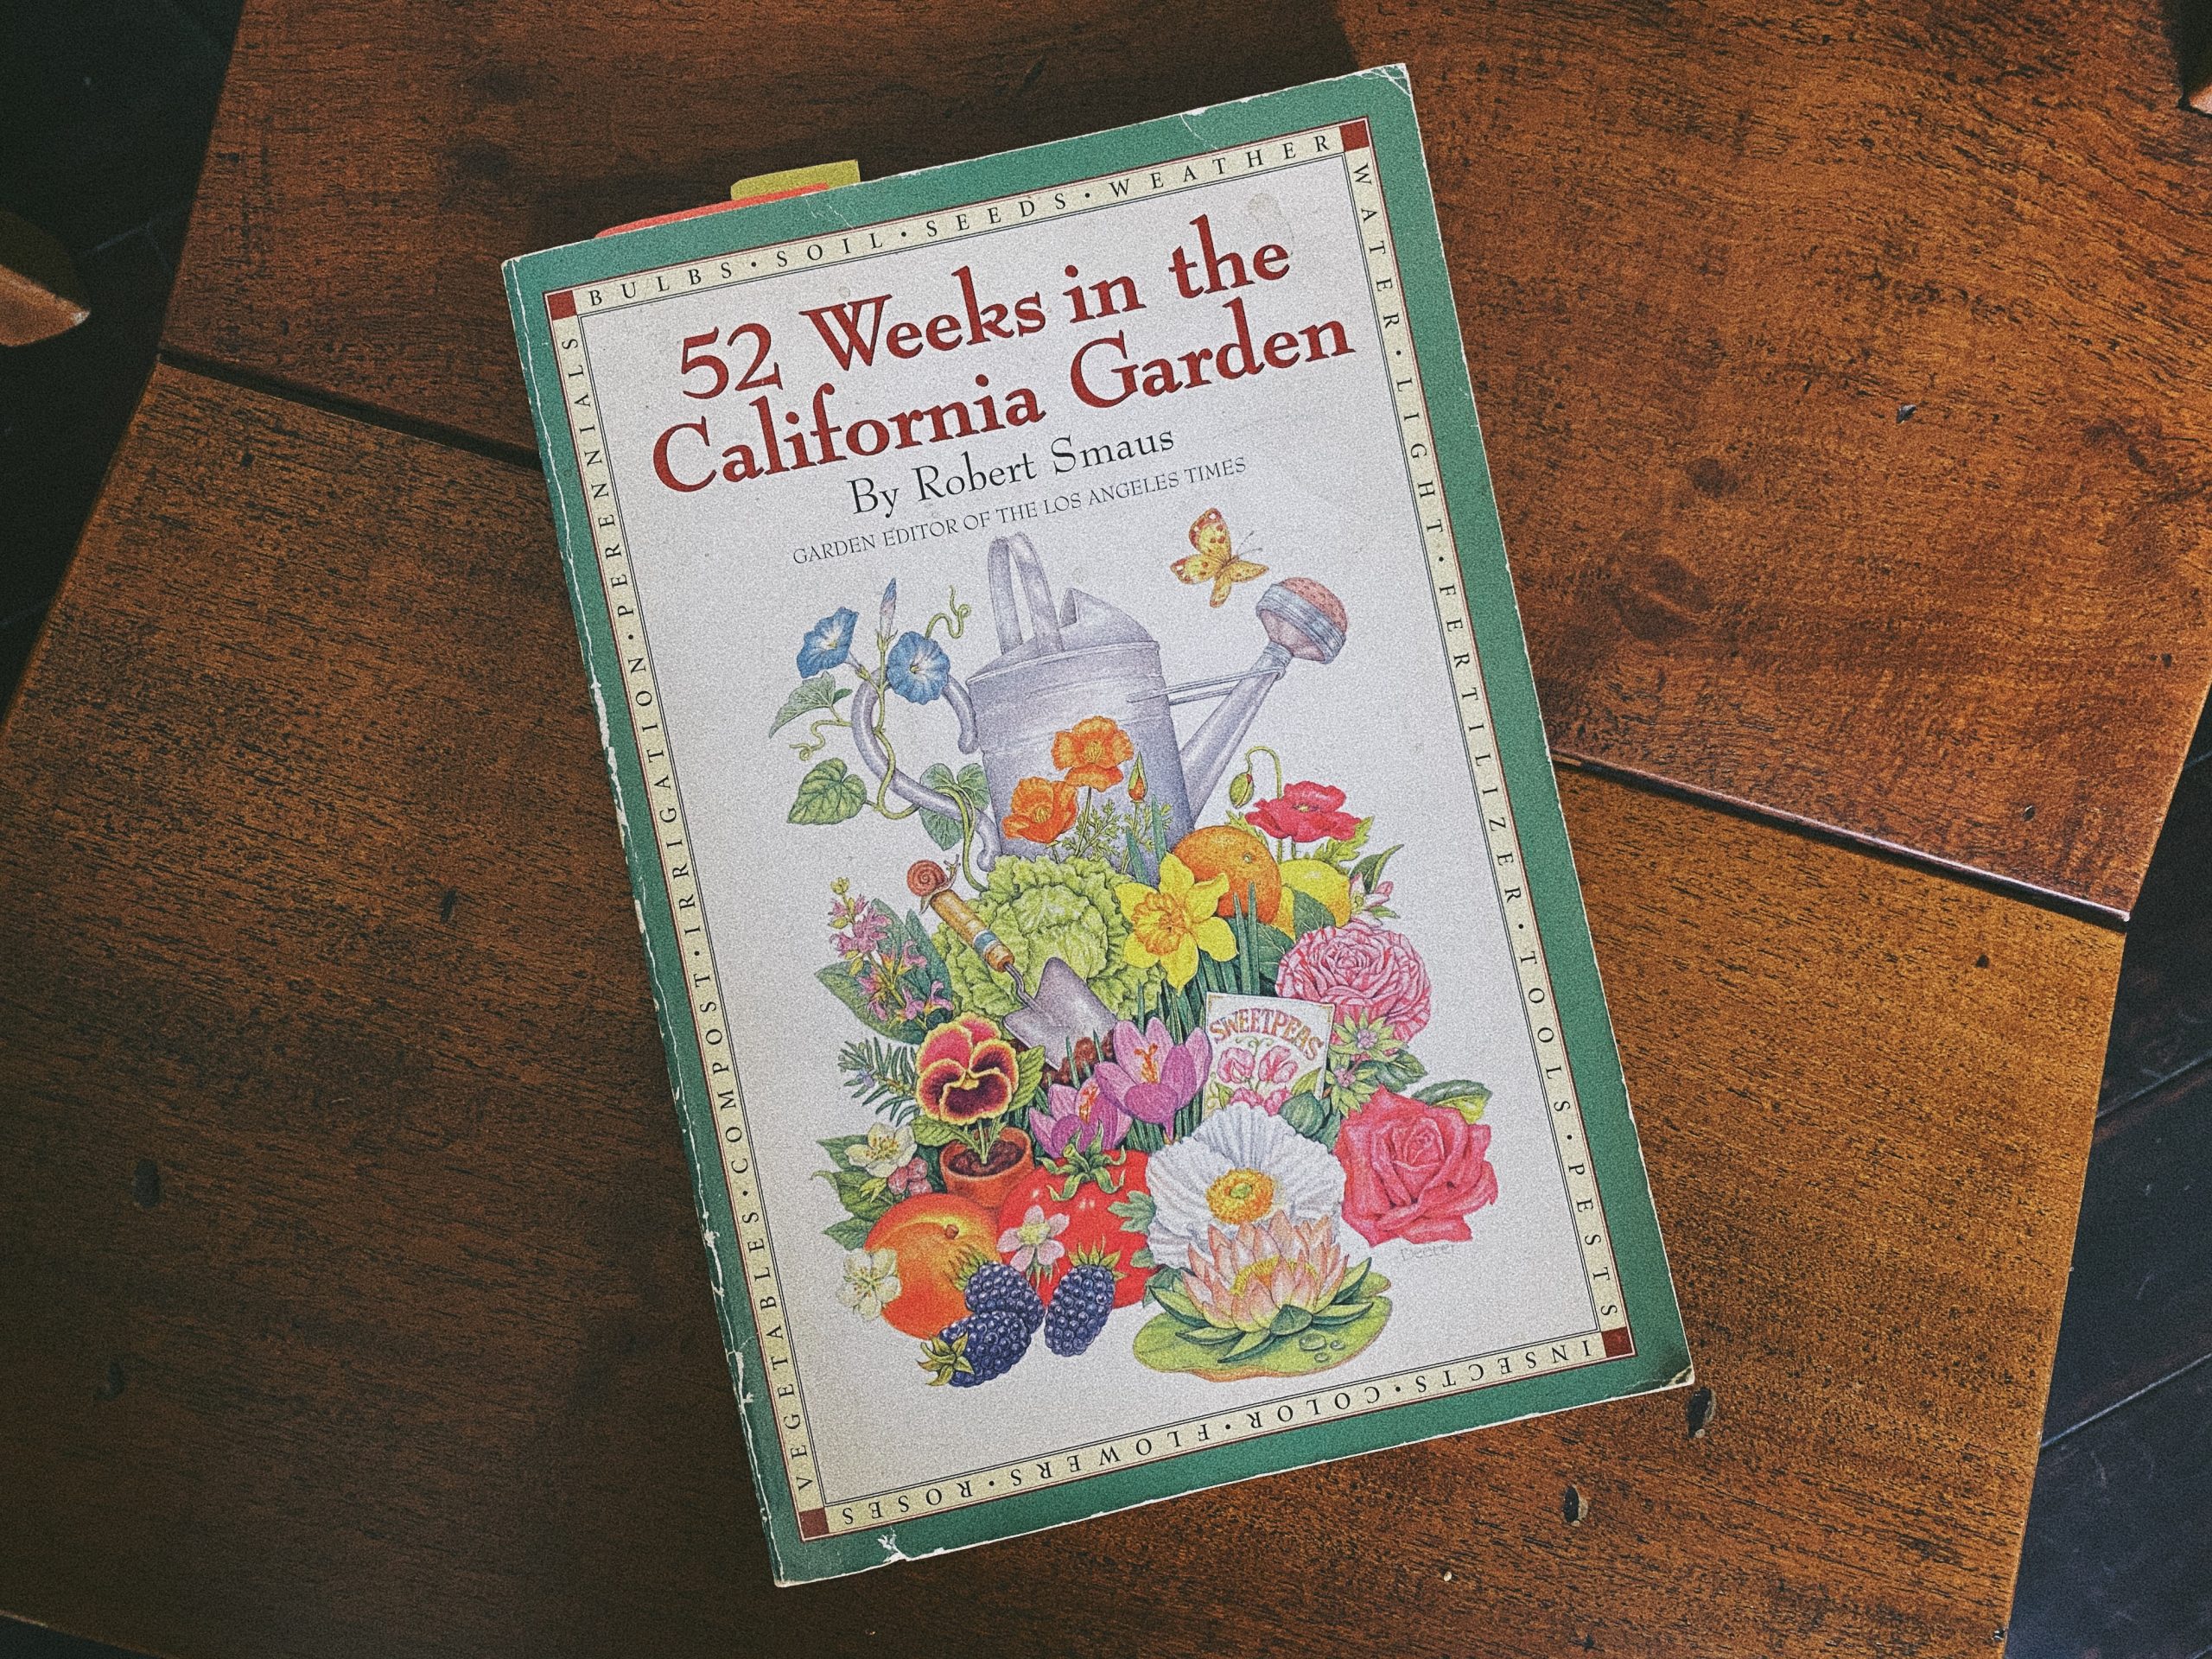 An image of the book 52 Weeks in the California Garden